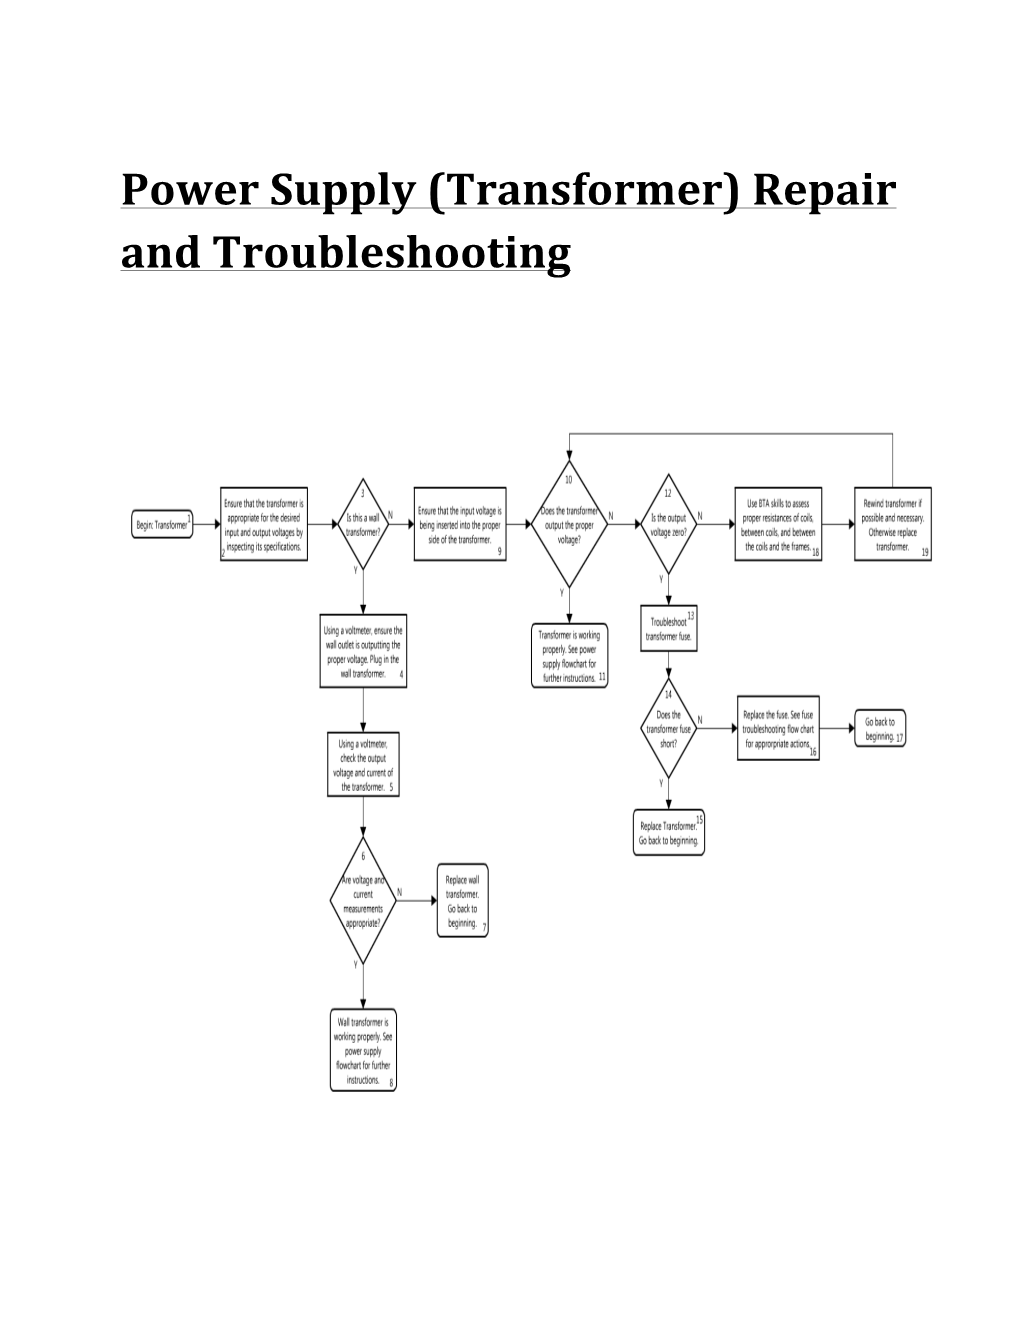 Power Supply (Transformer) Repair and Troubleshooting